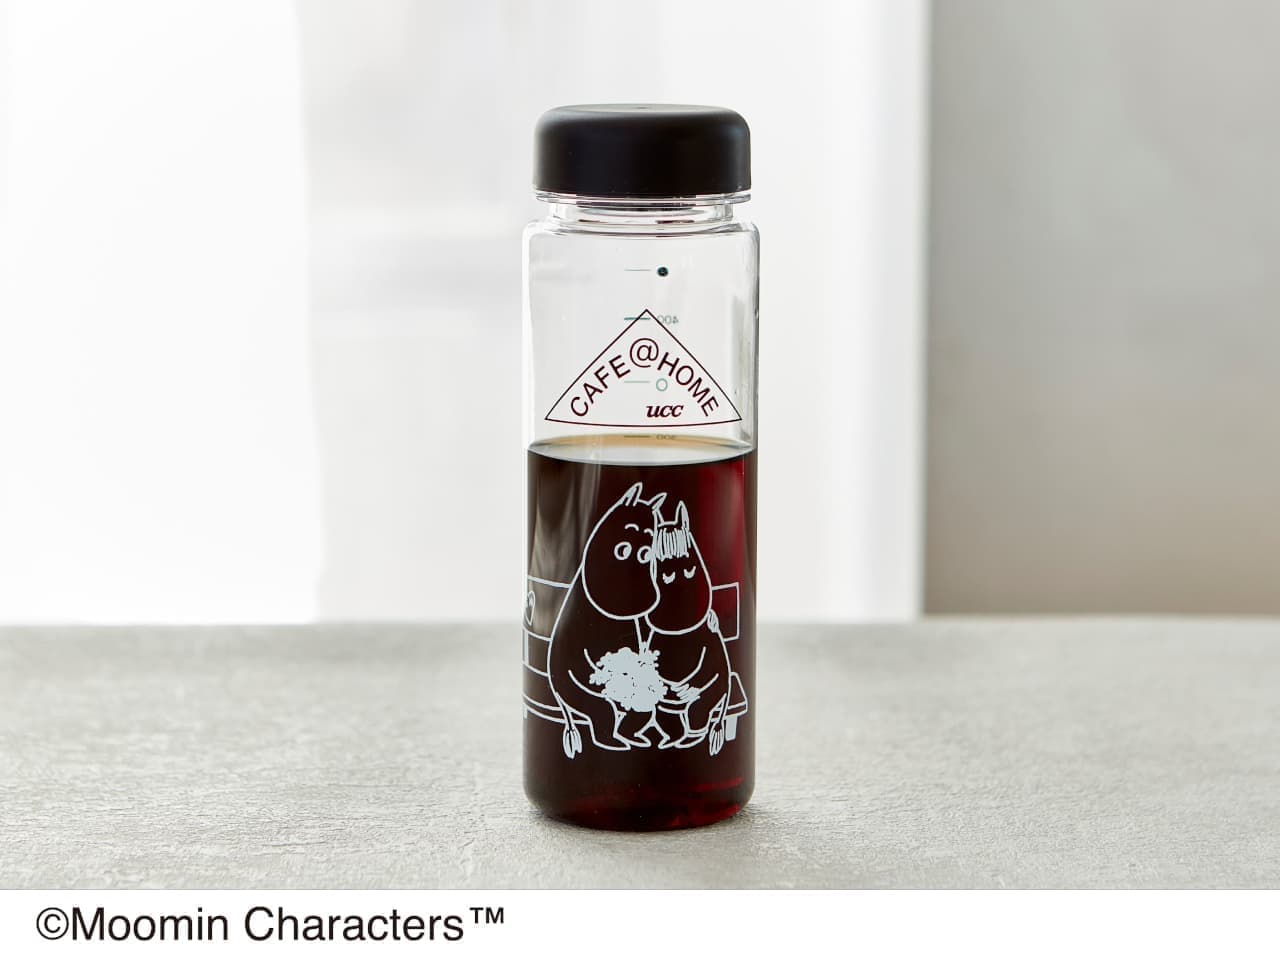 COFFEE STYLE UCC "CAFE@HOME Moomin Valley Water-drawn Iced Coffee".